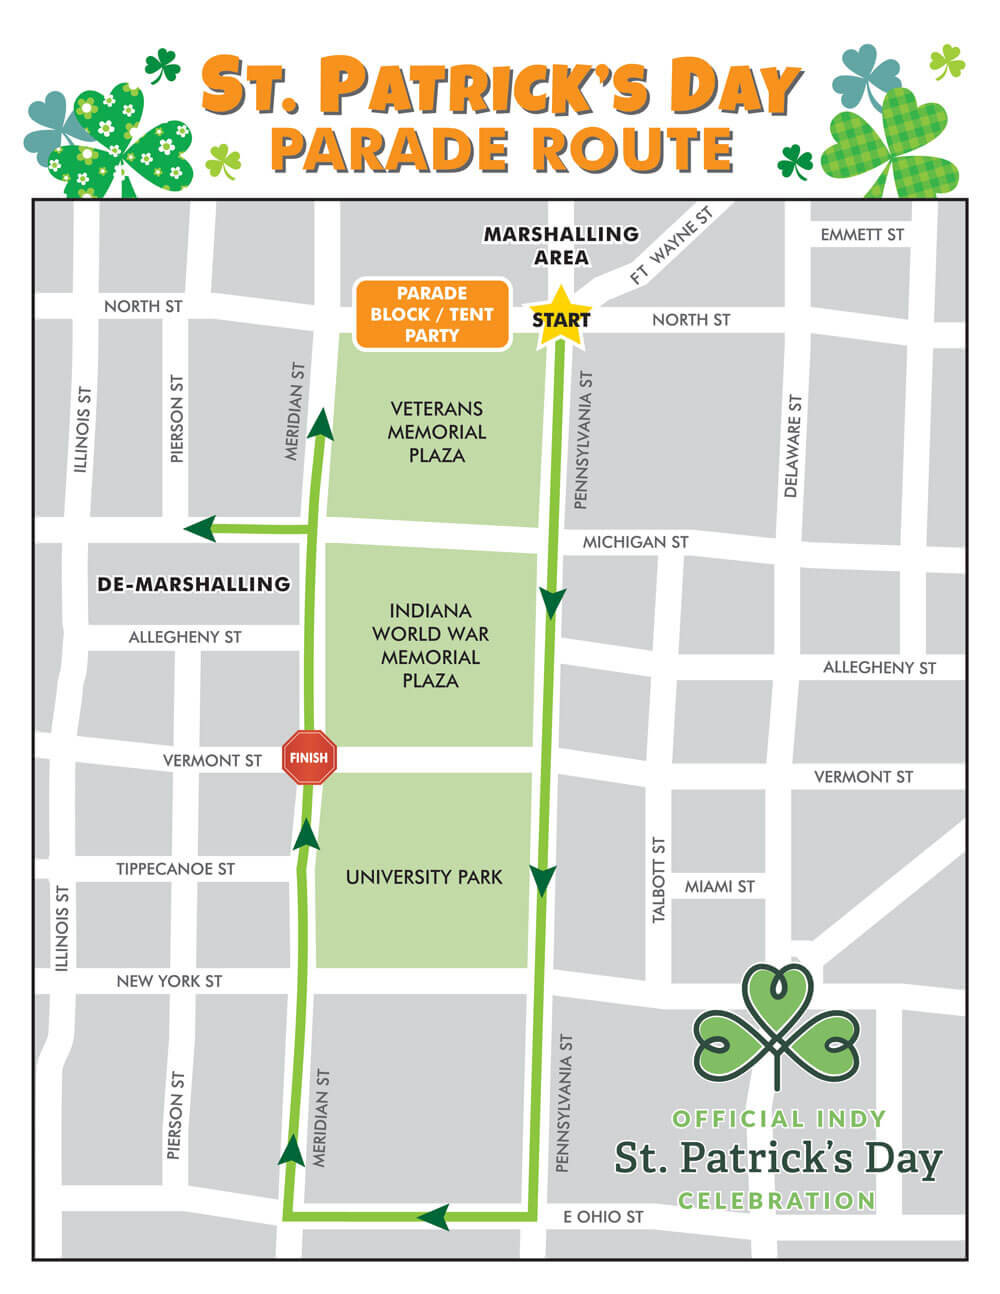 St. Patrick’s Day Parade & Tent Party Official Indianapolis Celebration